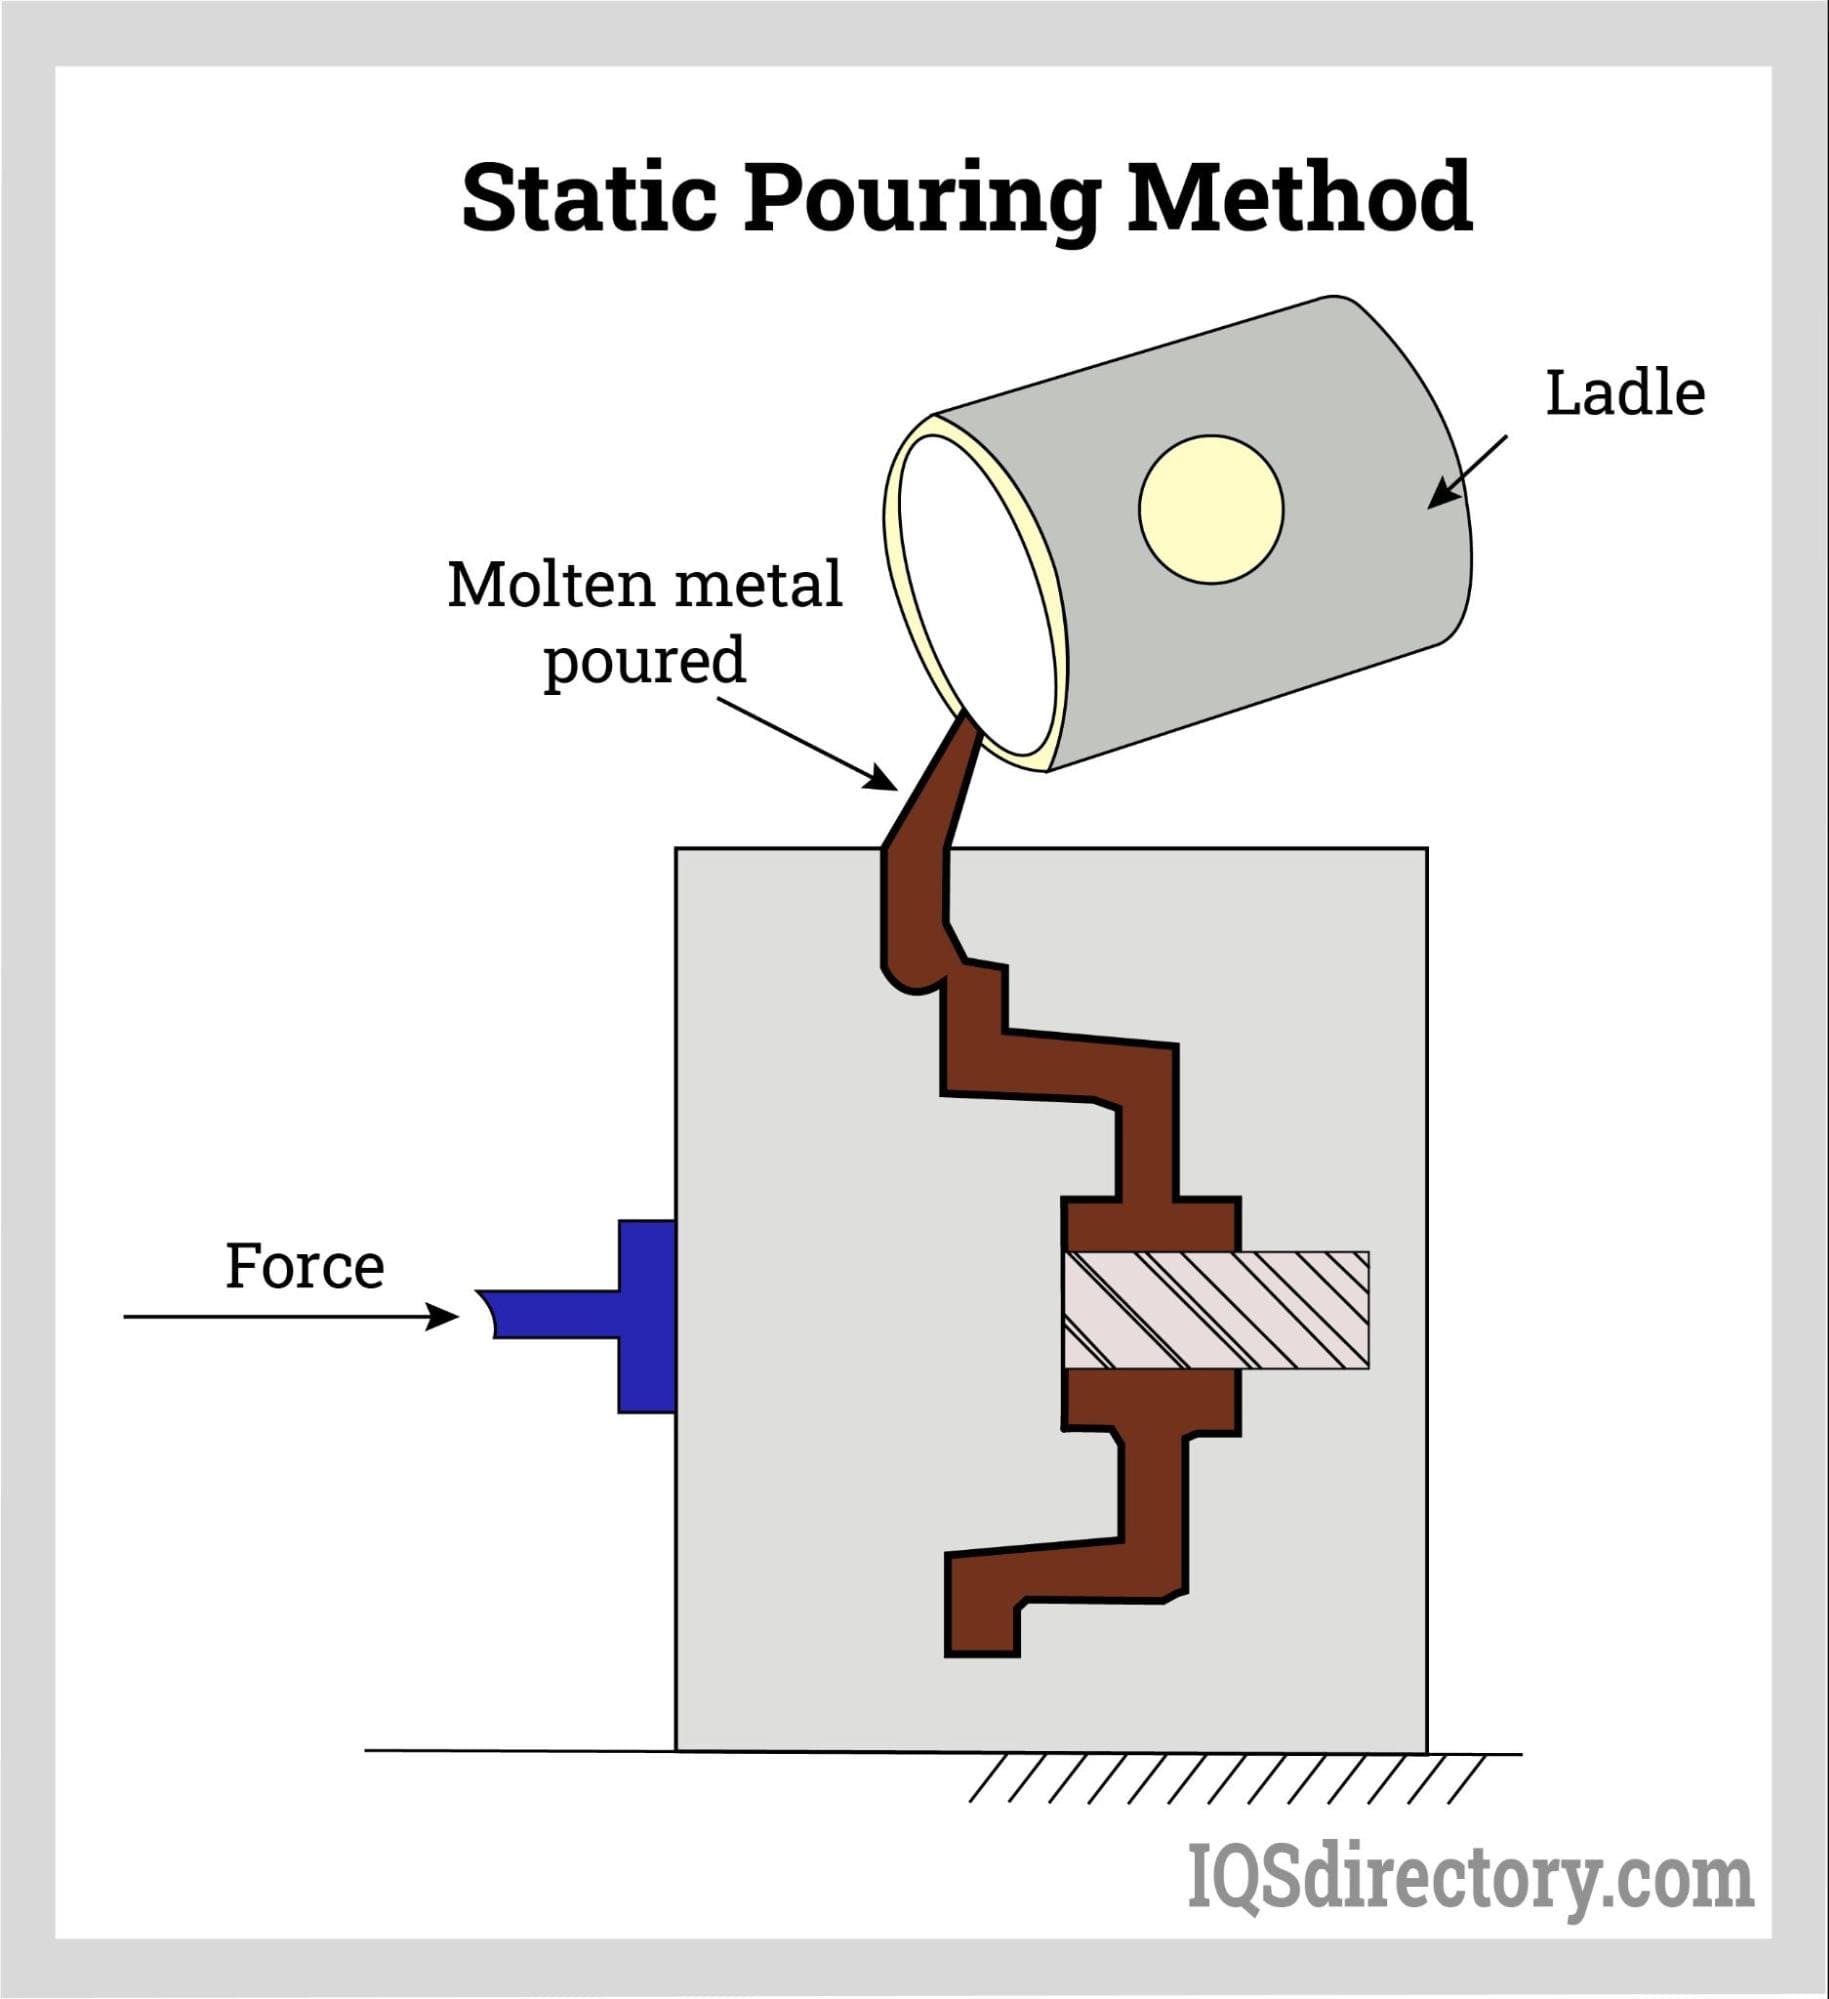 Static Pouring Method